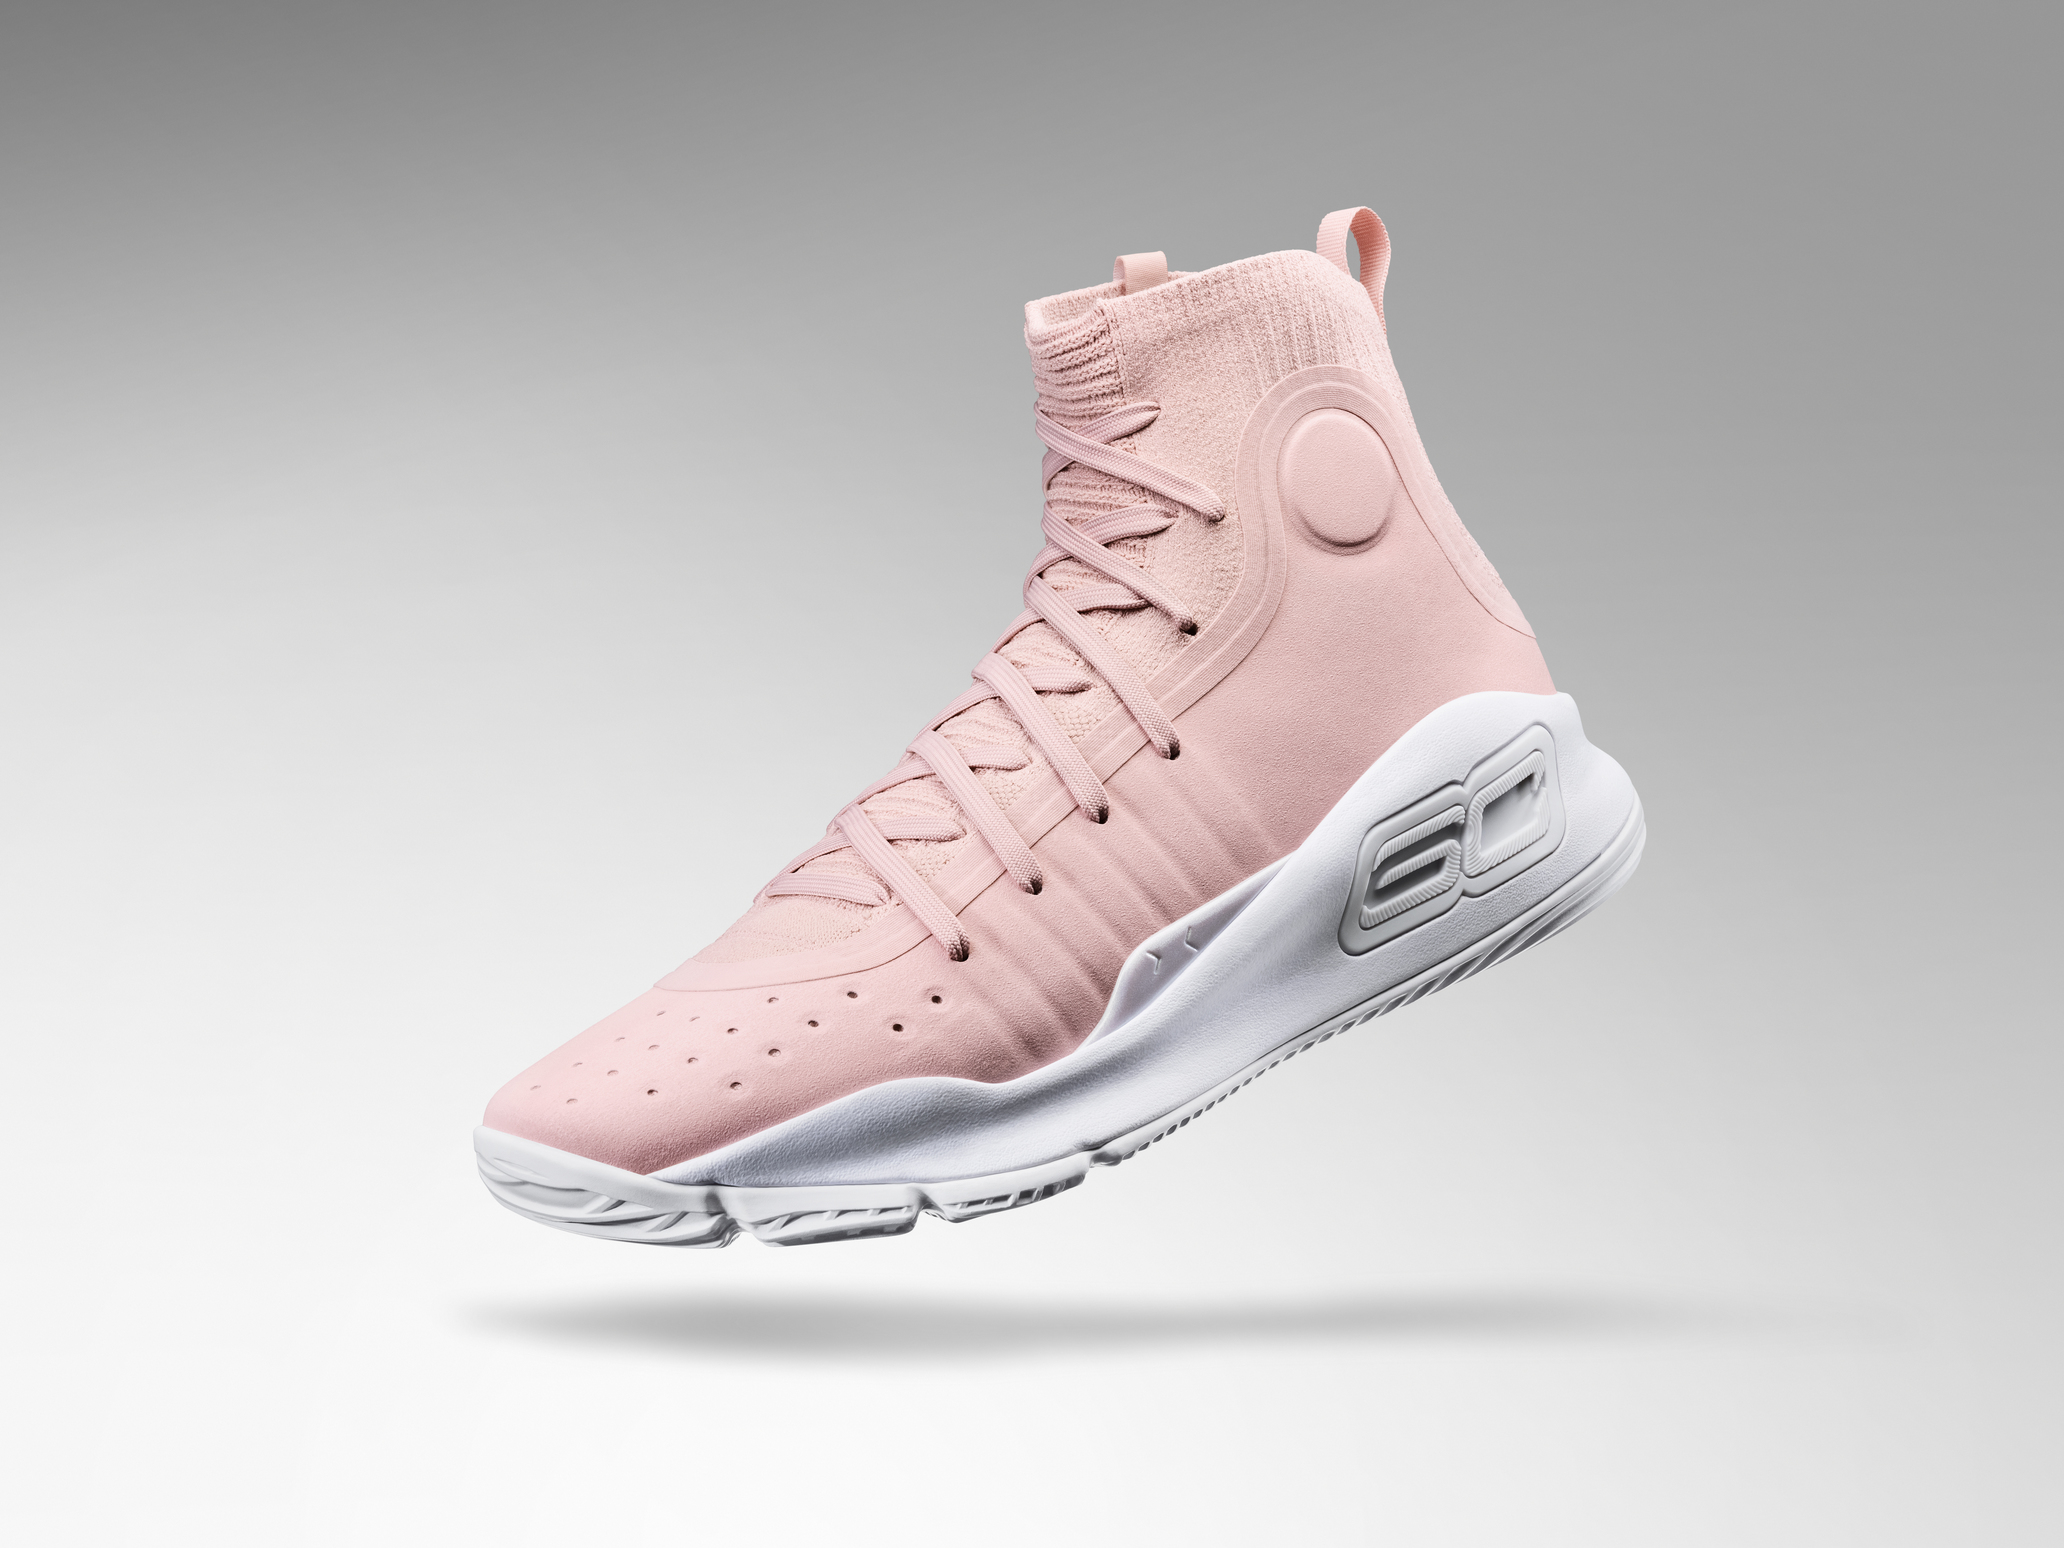 Under Armour Curry 4 Flushed Pink 3